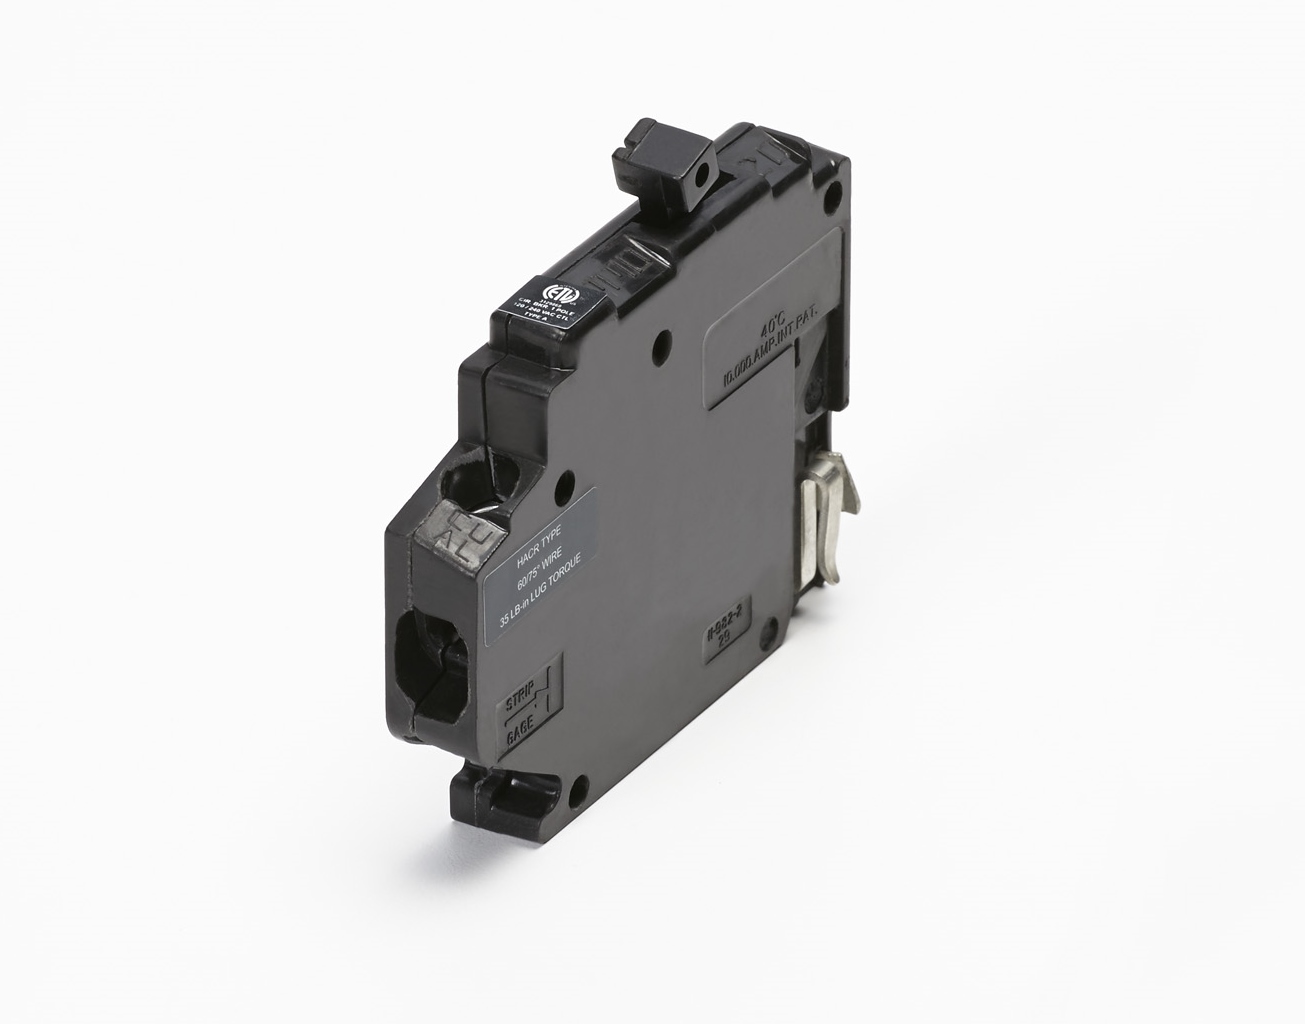 Connecticut Electric circuit breaker type A. For use in Challenger and T&B load centers. 1/2" thick. Two units (R+L) form a Twin 1-pole breaker or single units can be placed on the outsides of a 2-pole breaker to fill a 2" space. ETL Listed. 10,000 AIC 15A Right Clip. Clamshell Package with Security Tag.